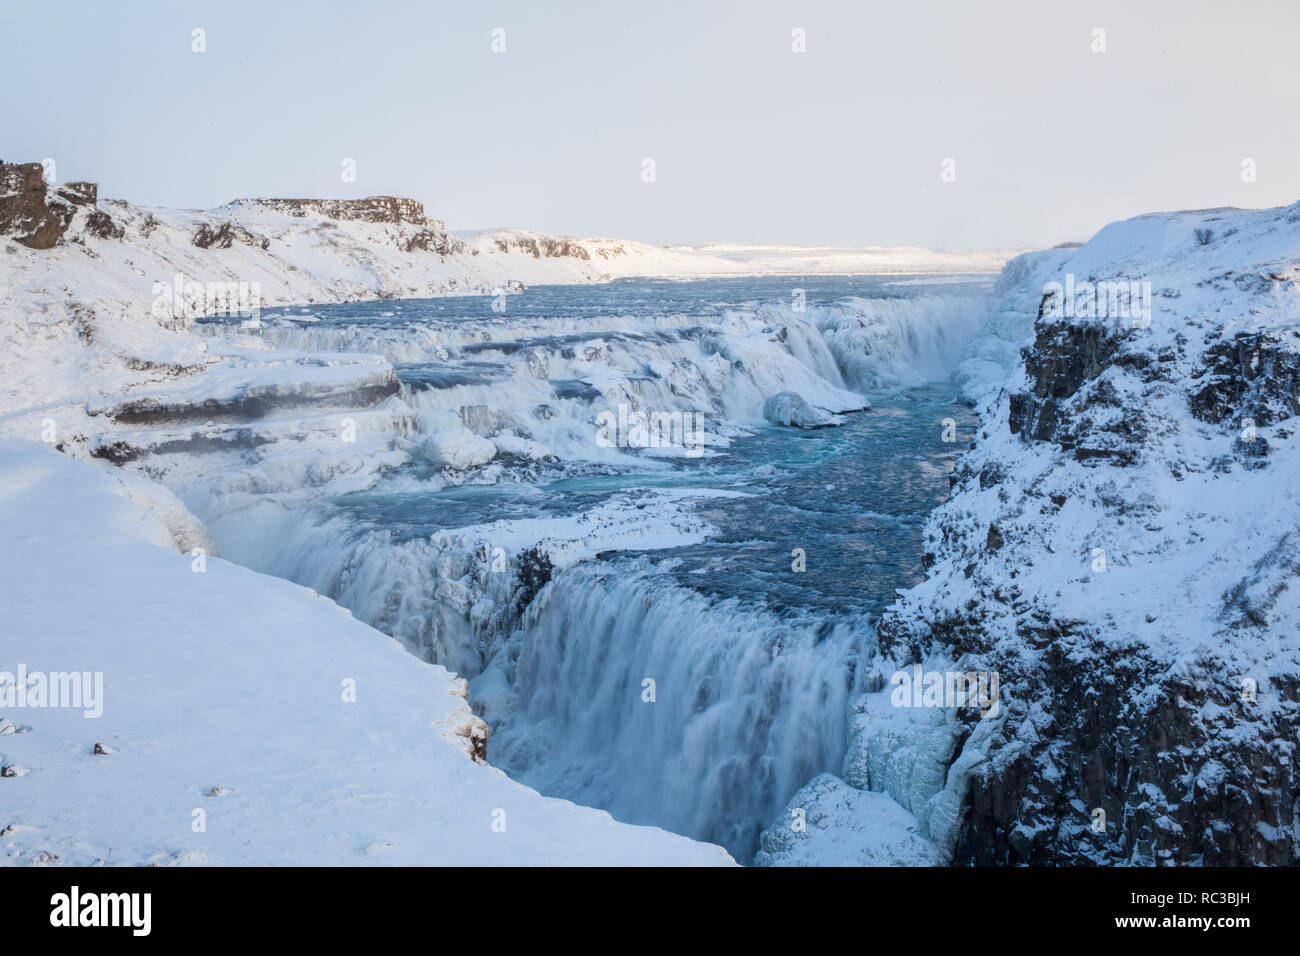 Gulfoss Waterfall, part of the Golden Circle Tour in Iceland, during January, covered in snow Stock Photo